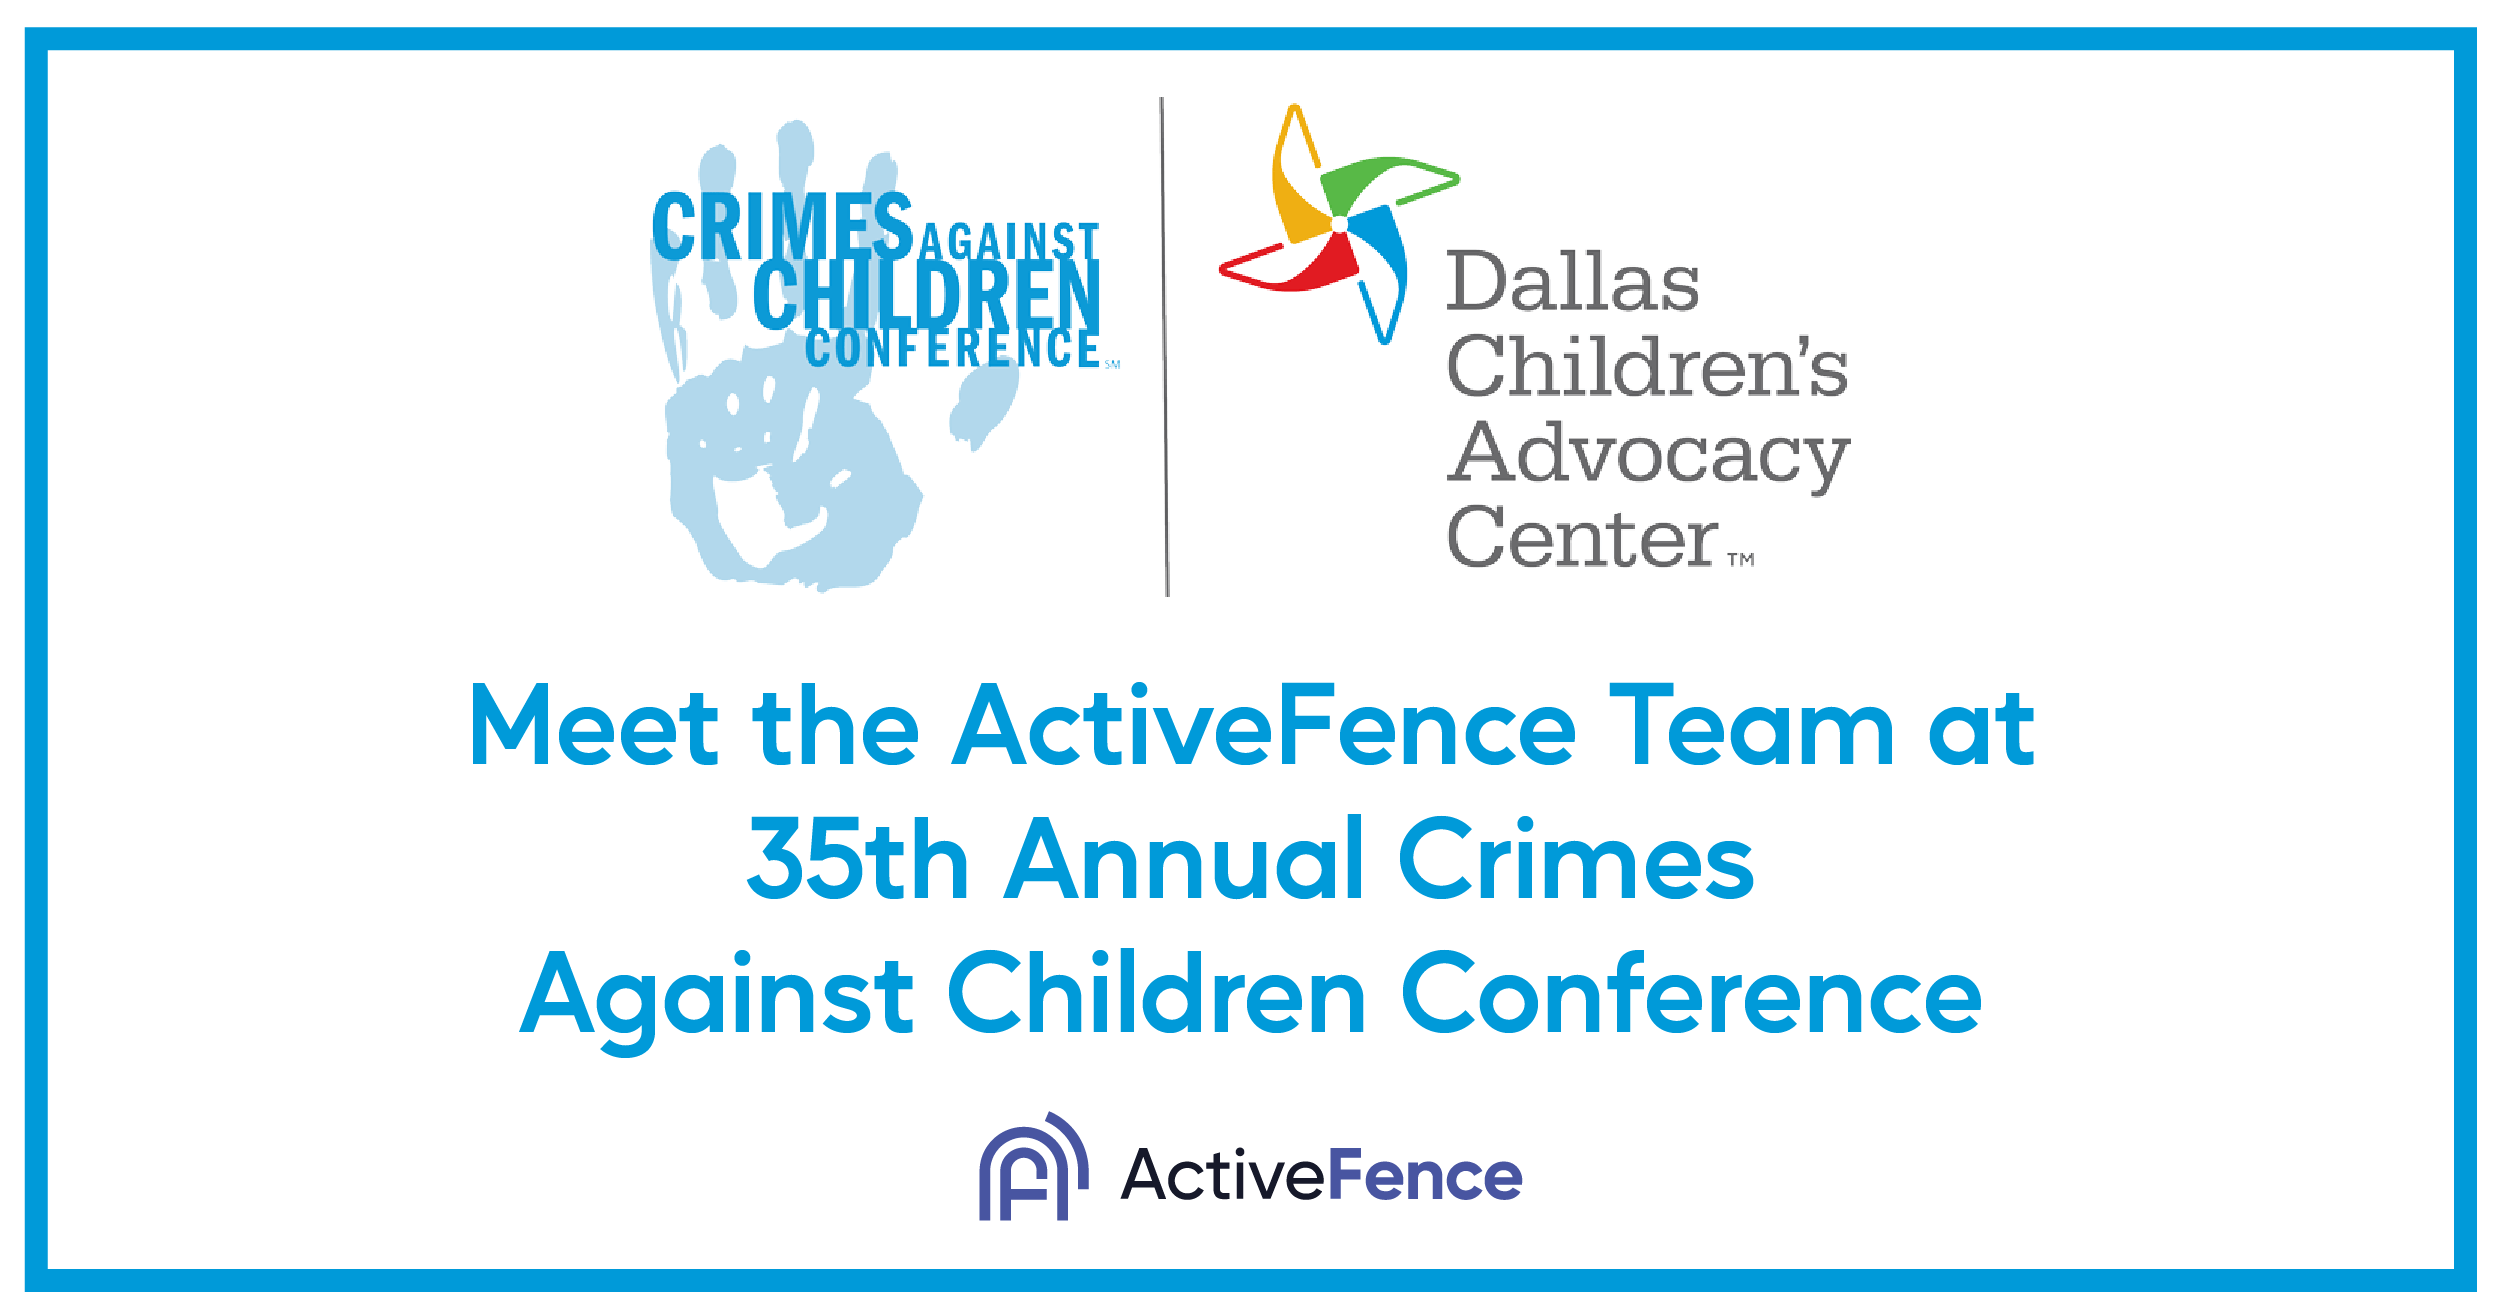 Promotional banner for the 35th Annual Crimes Against Children Conference, featuring the logos of the Dallas Children's Advocacy Center and ActiveFence.